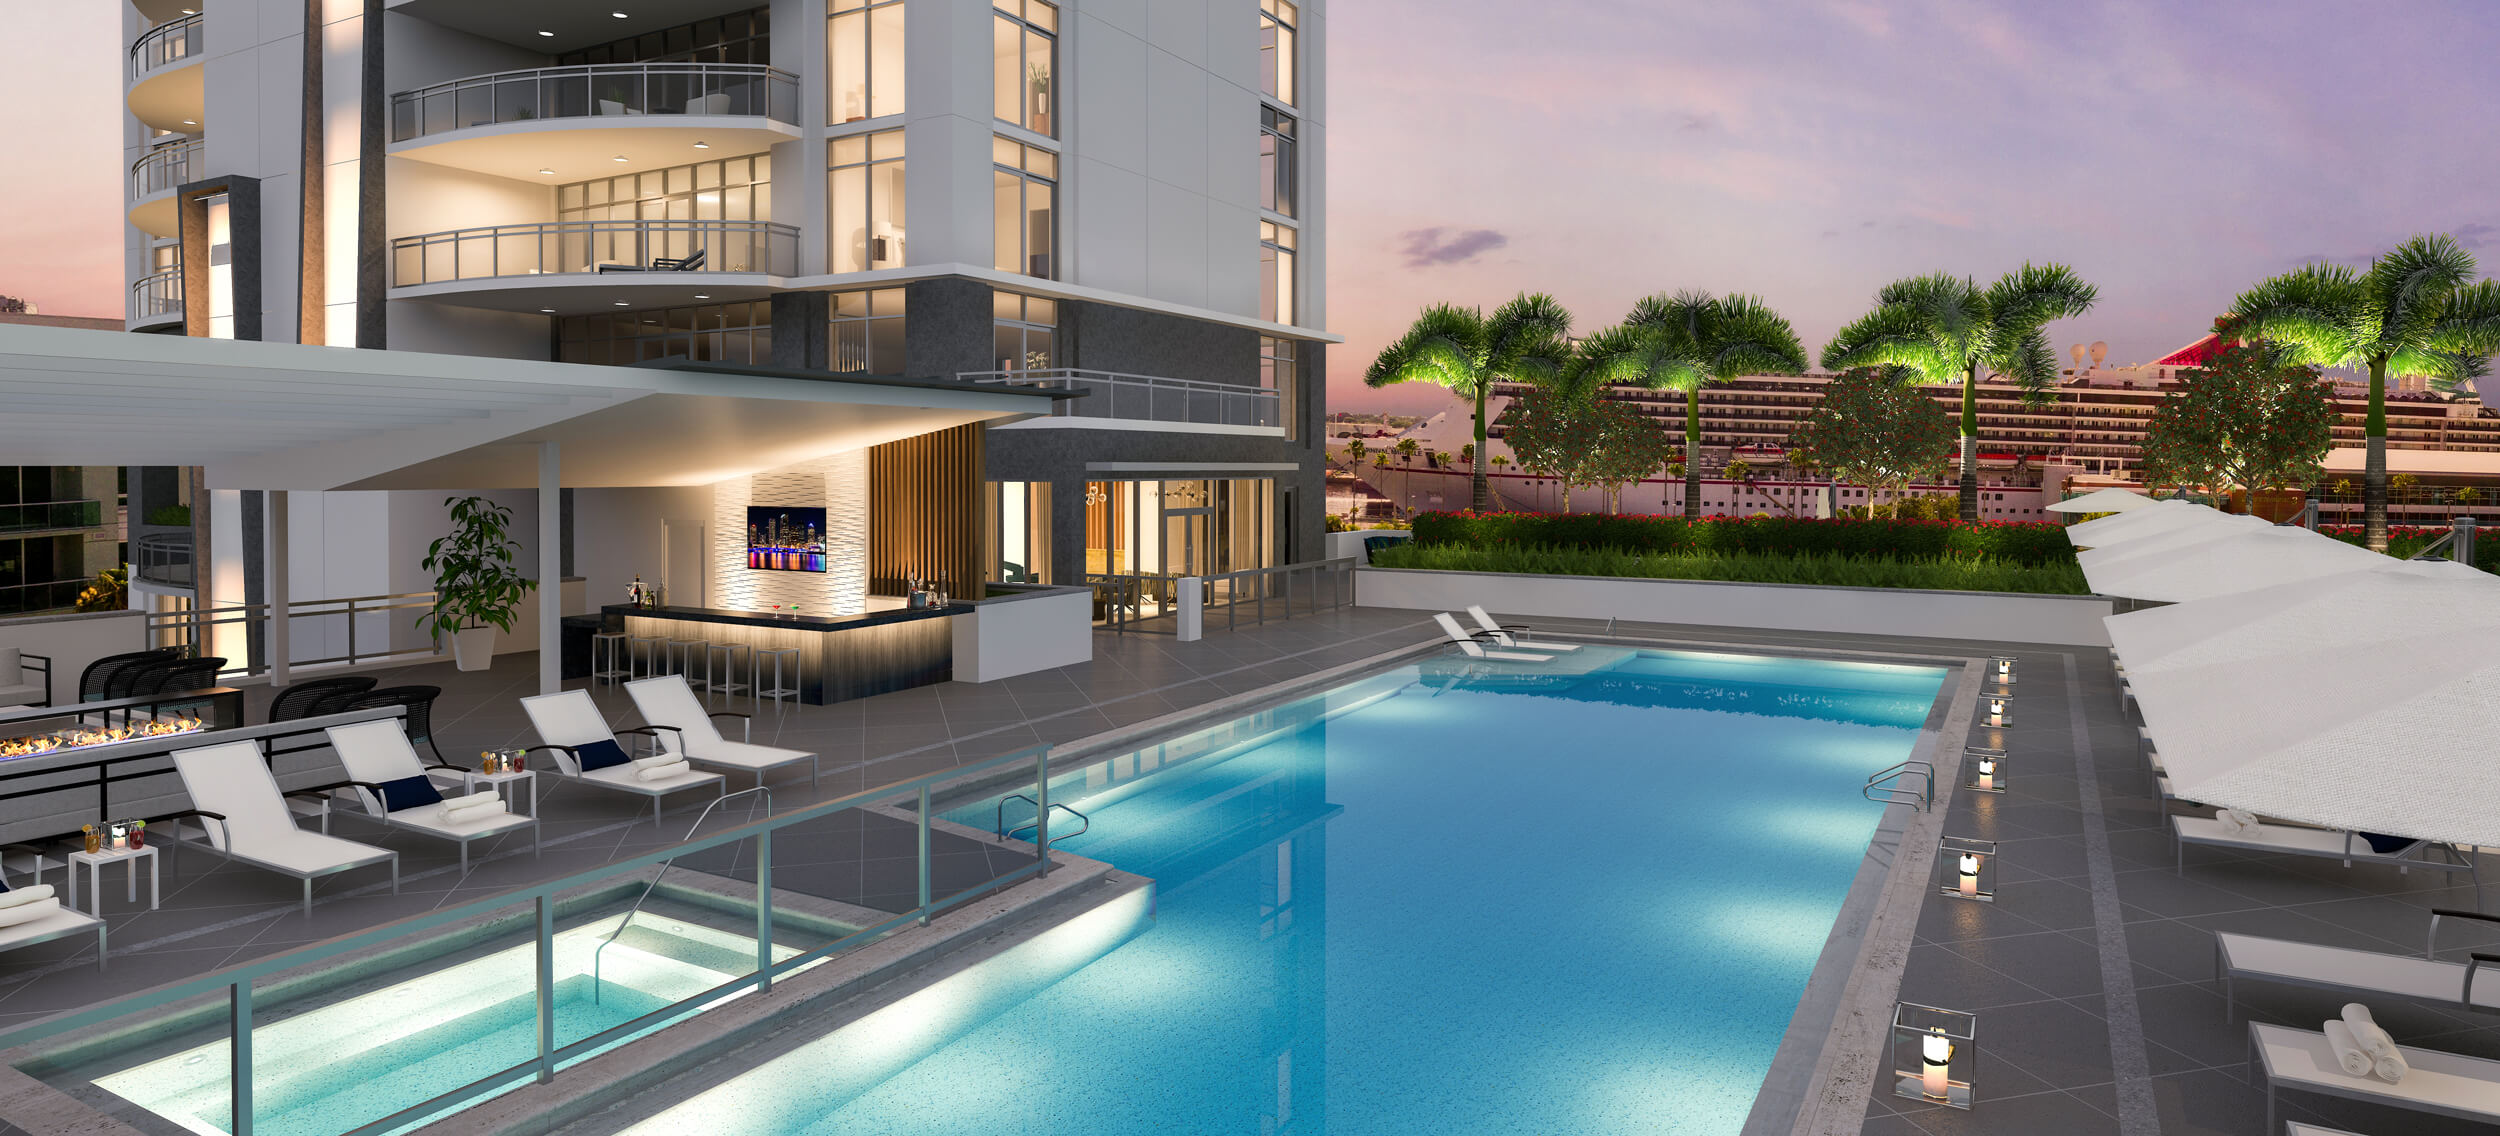 Inside 8 of Downtown's Newest Apartments & Condos - Tampa Magazines